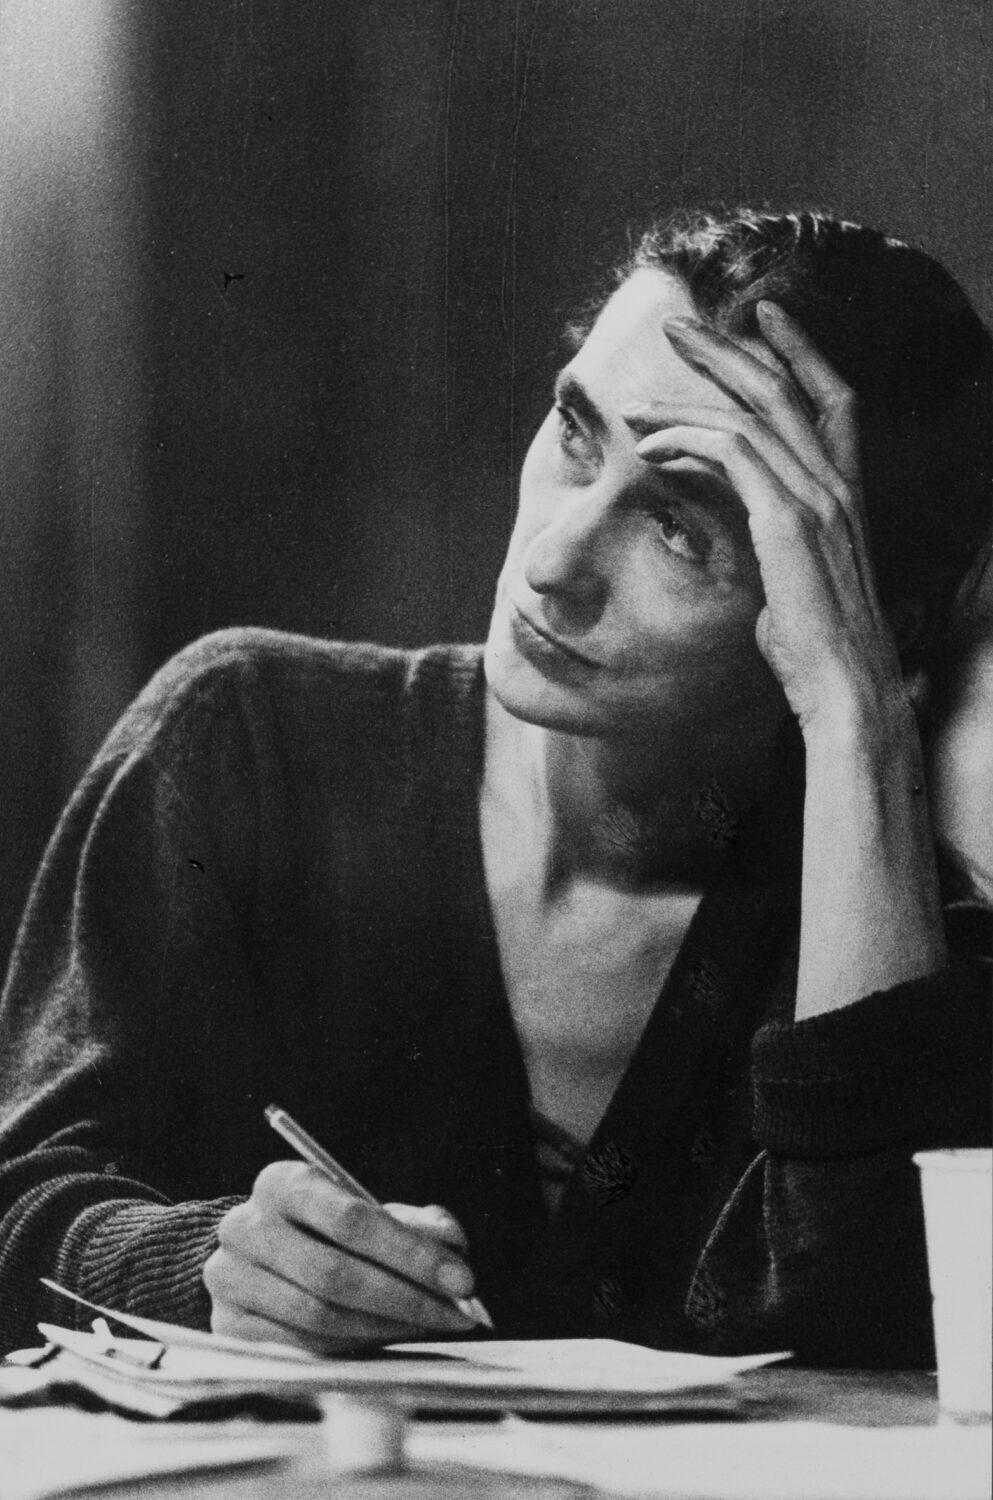 Talking about people through dance – <br />
The life story of Pina Bausch